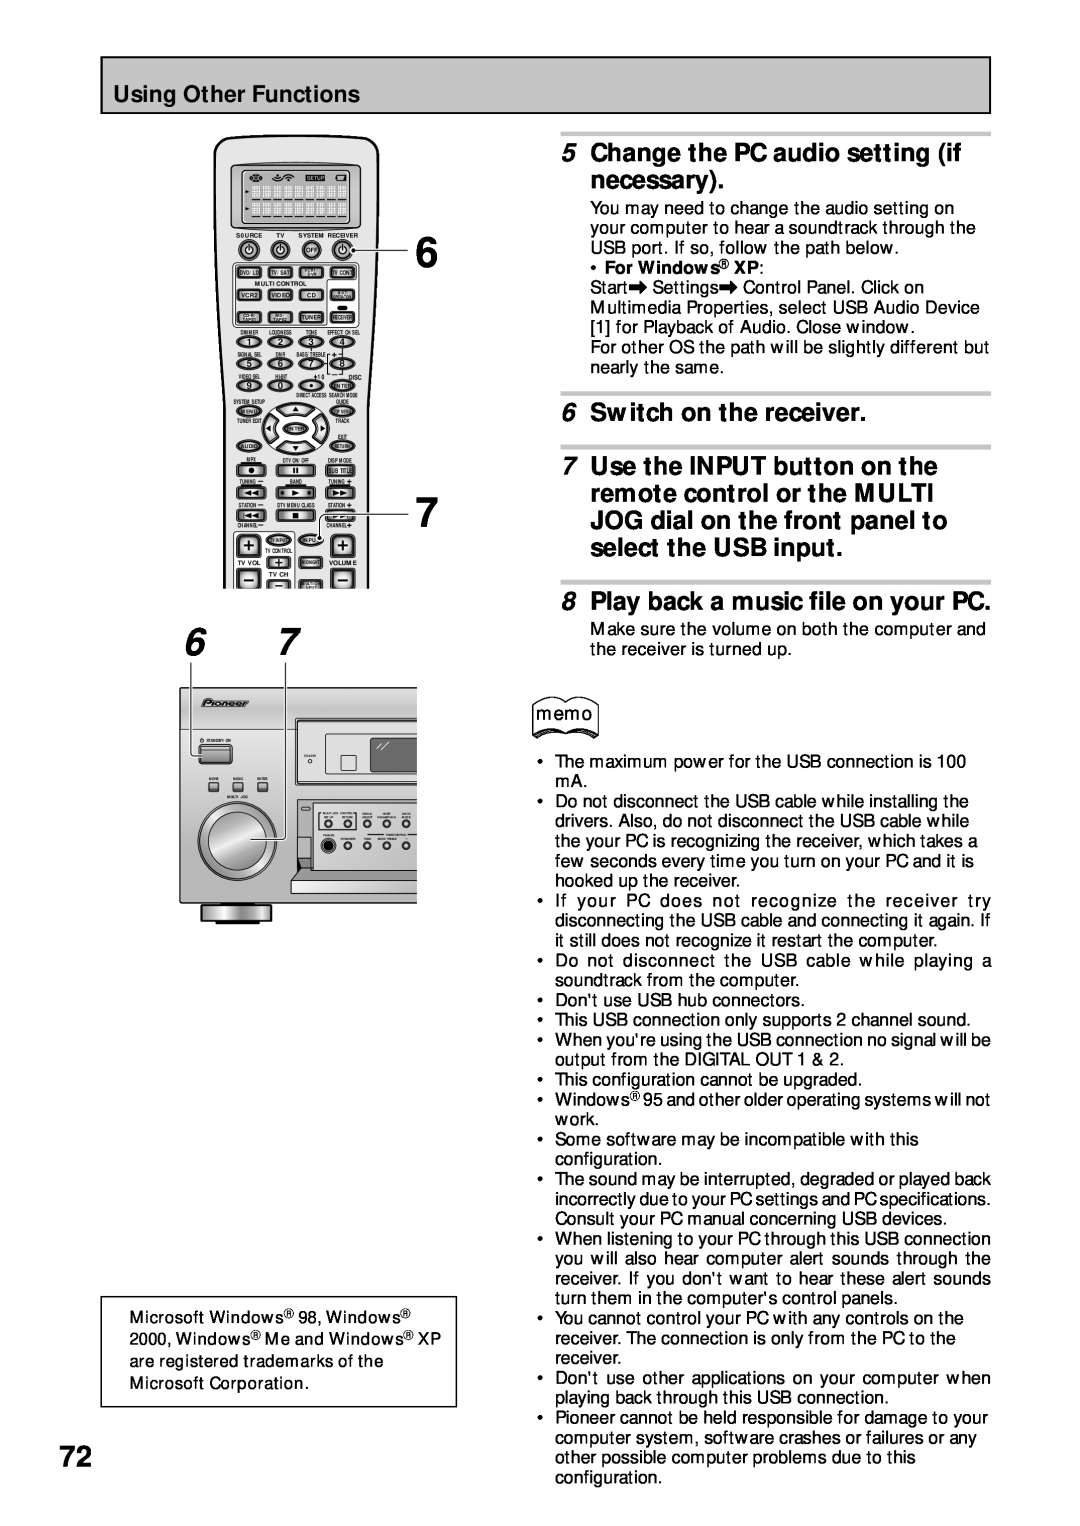 Pioneer VSX-45TX manual Change the PC audio setting if, necessary, 6Switch on the receiver, Use the INPUT button on the 